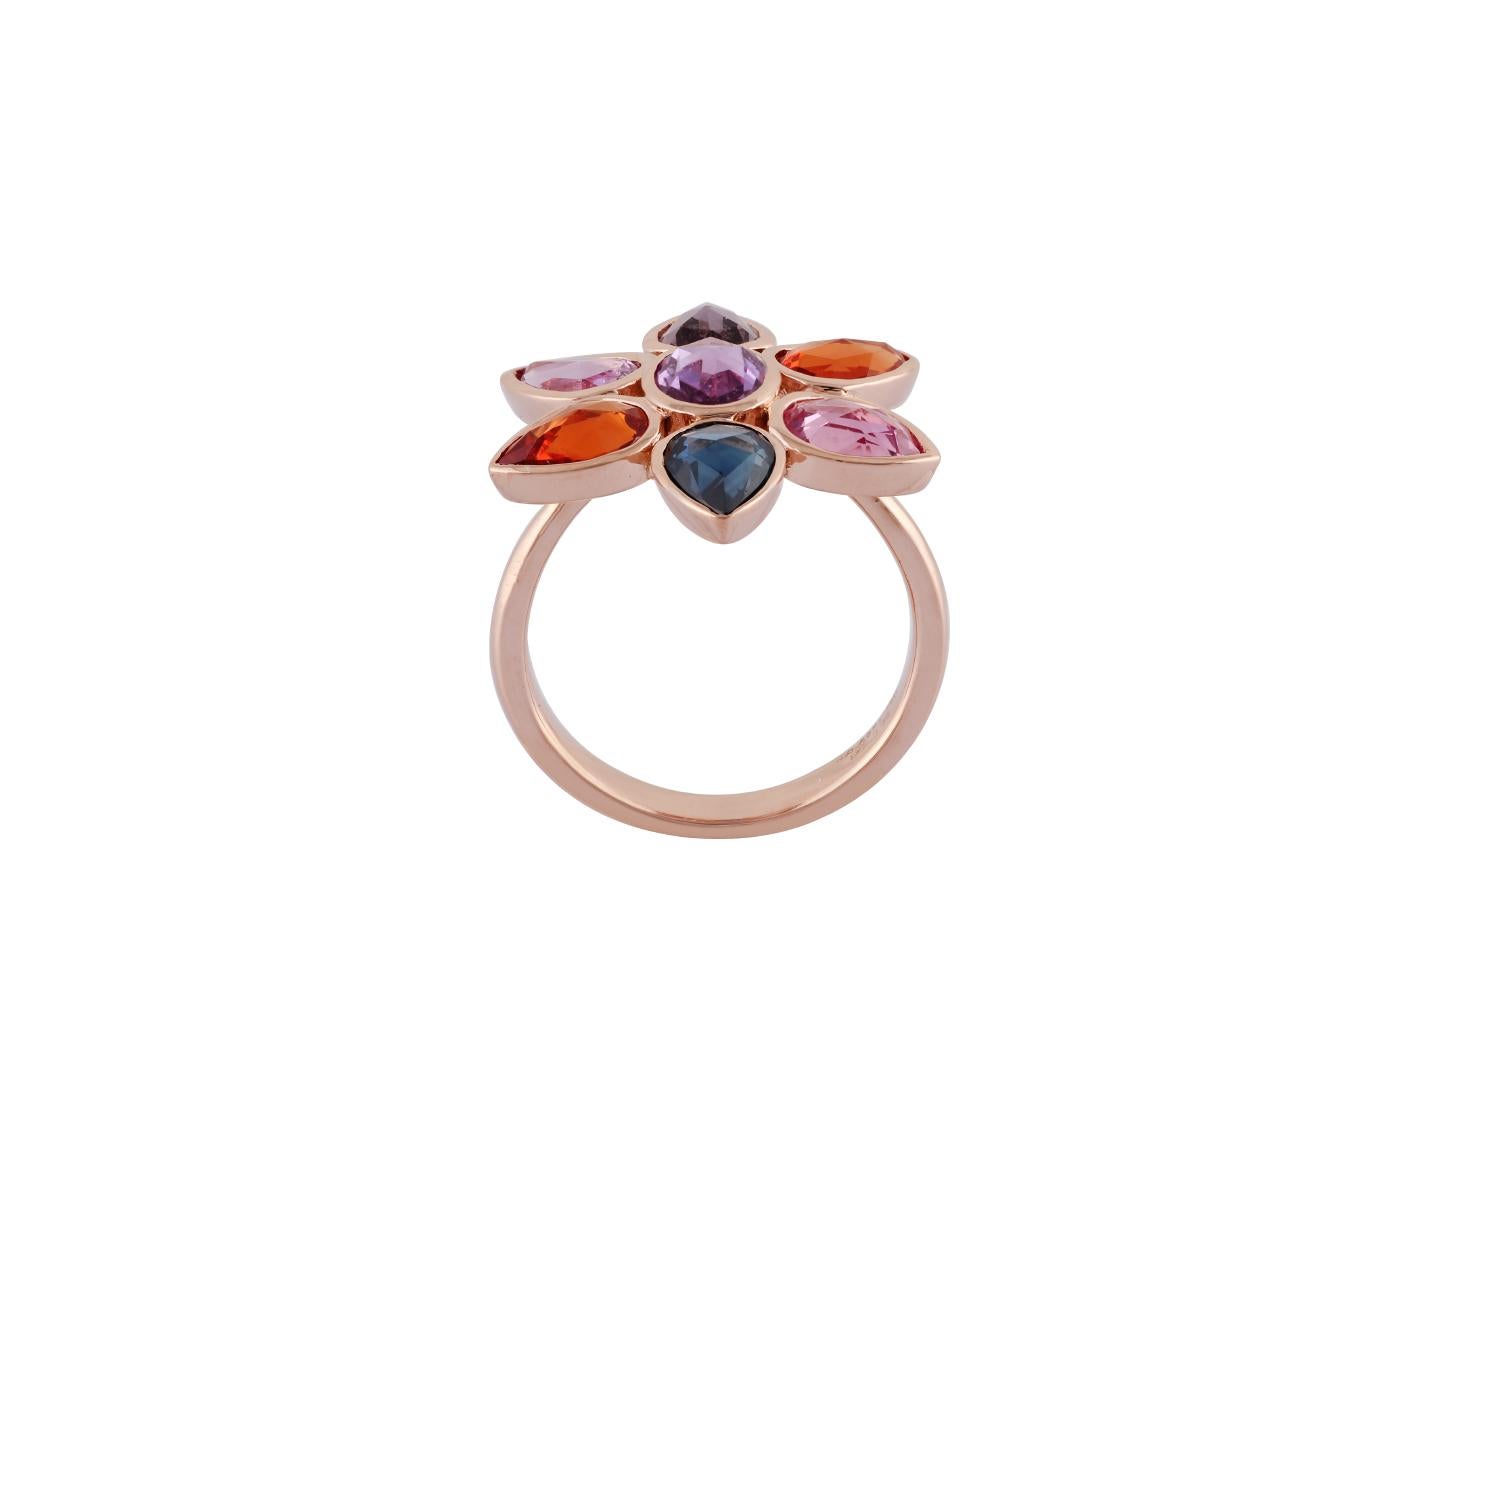 This is an elegant and wearable ring with a beautiful combination of multi-colored sapphires in a motif of flower, features  6 rose cuts pear-shaped multi-colored sapphires & 1 rose-cut oval-shaped multi-colored sapphire total weight 3.98 carat, the